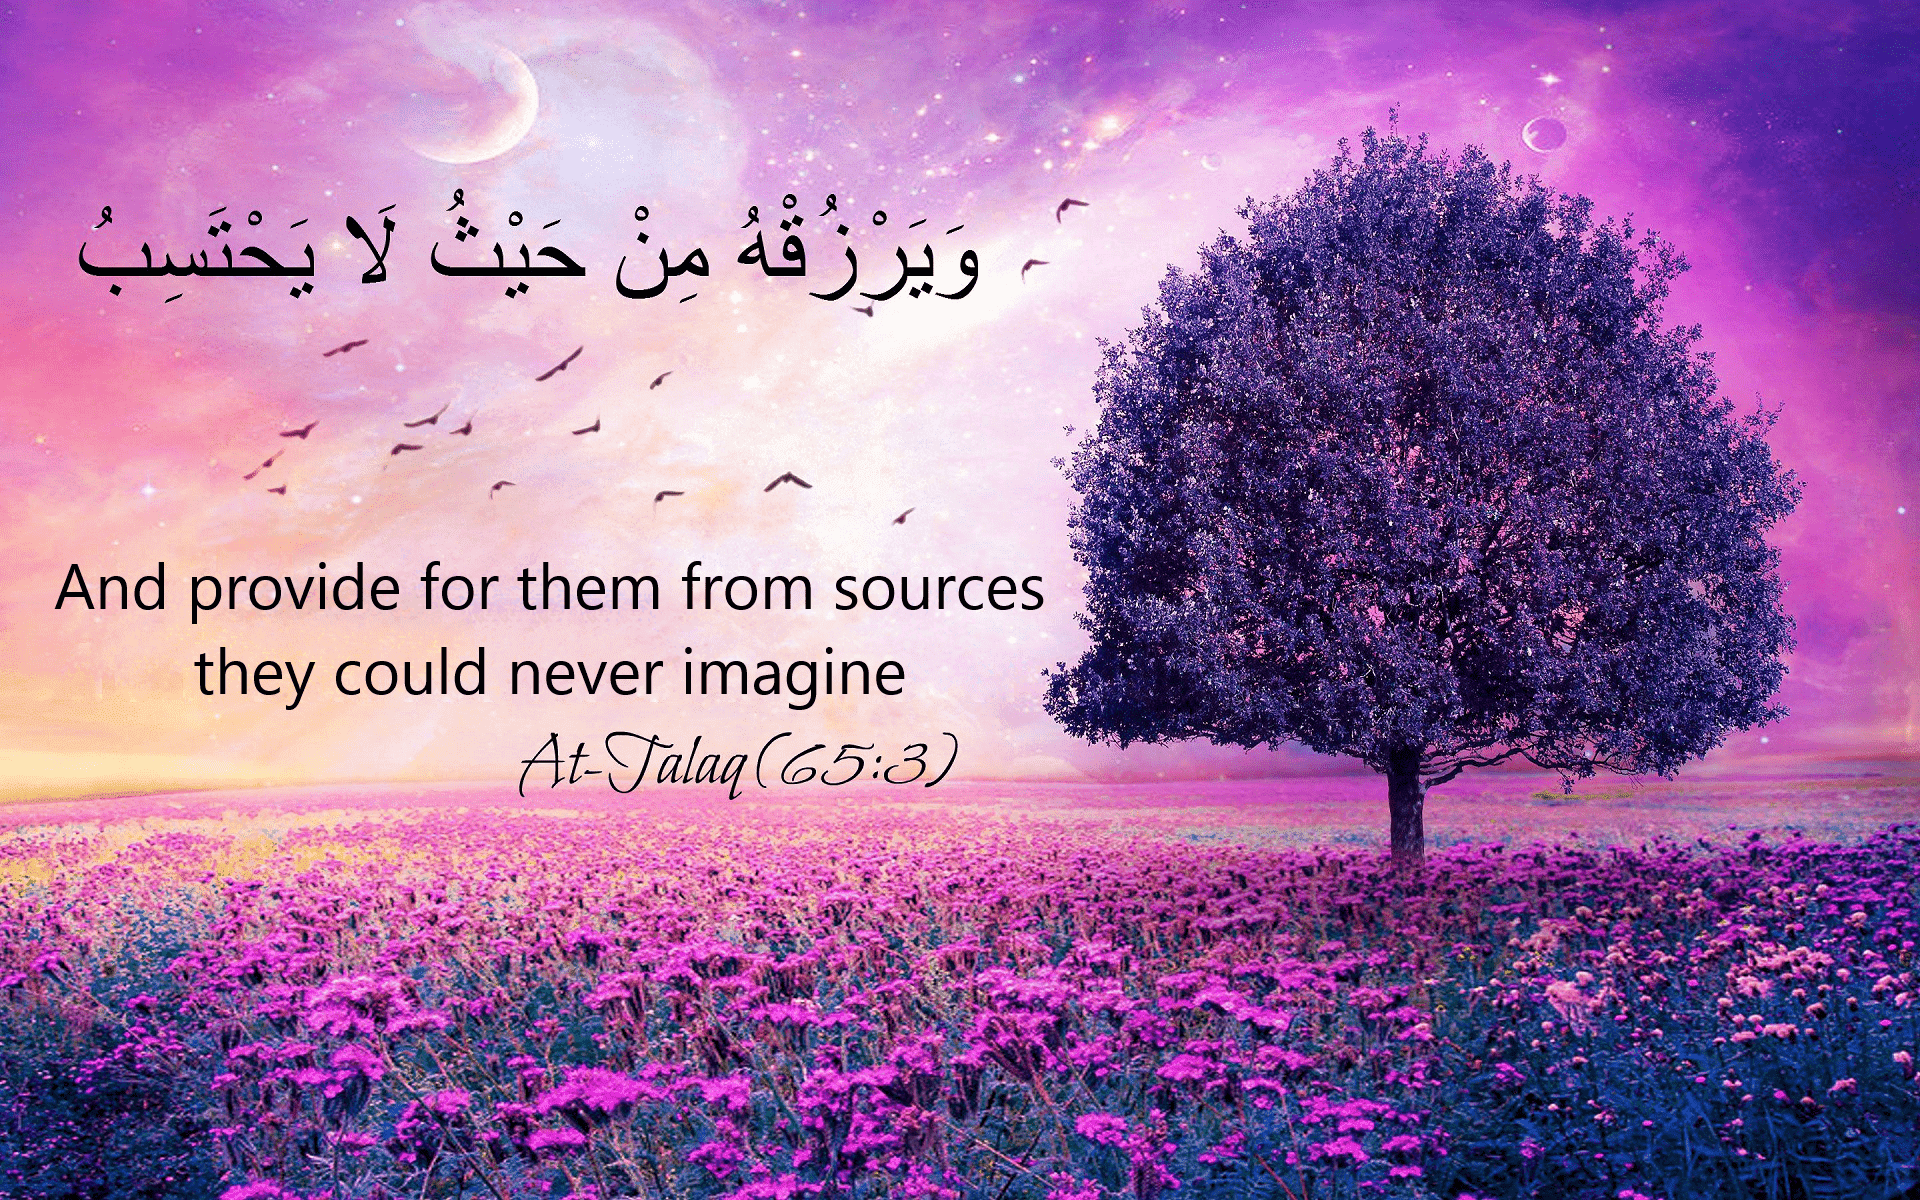 Obedience to Allah Brings Provision